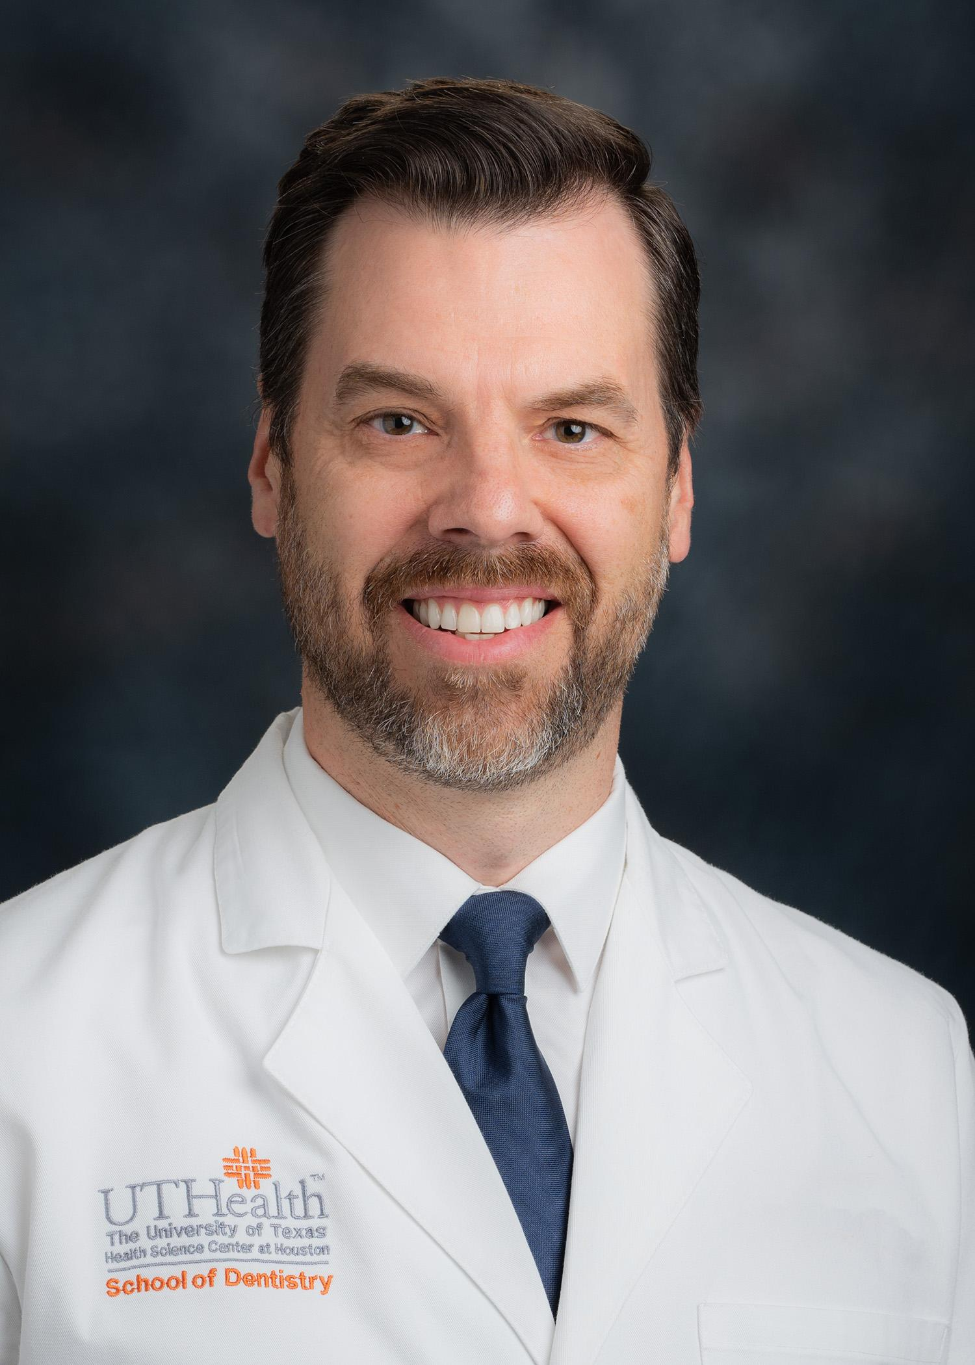 Dr. Greg Olson wearing a white coat and tie. The coat has the UTHealth School of Dentistry logo.